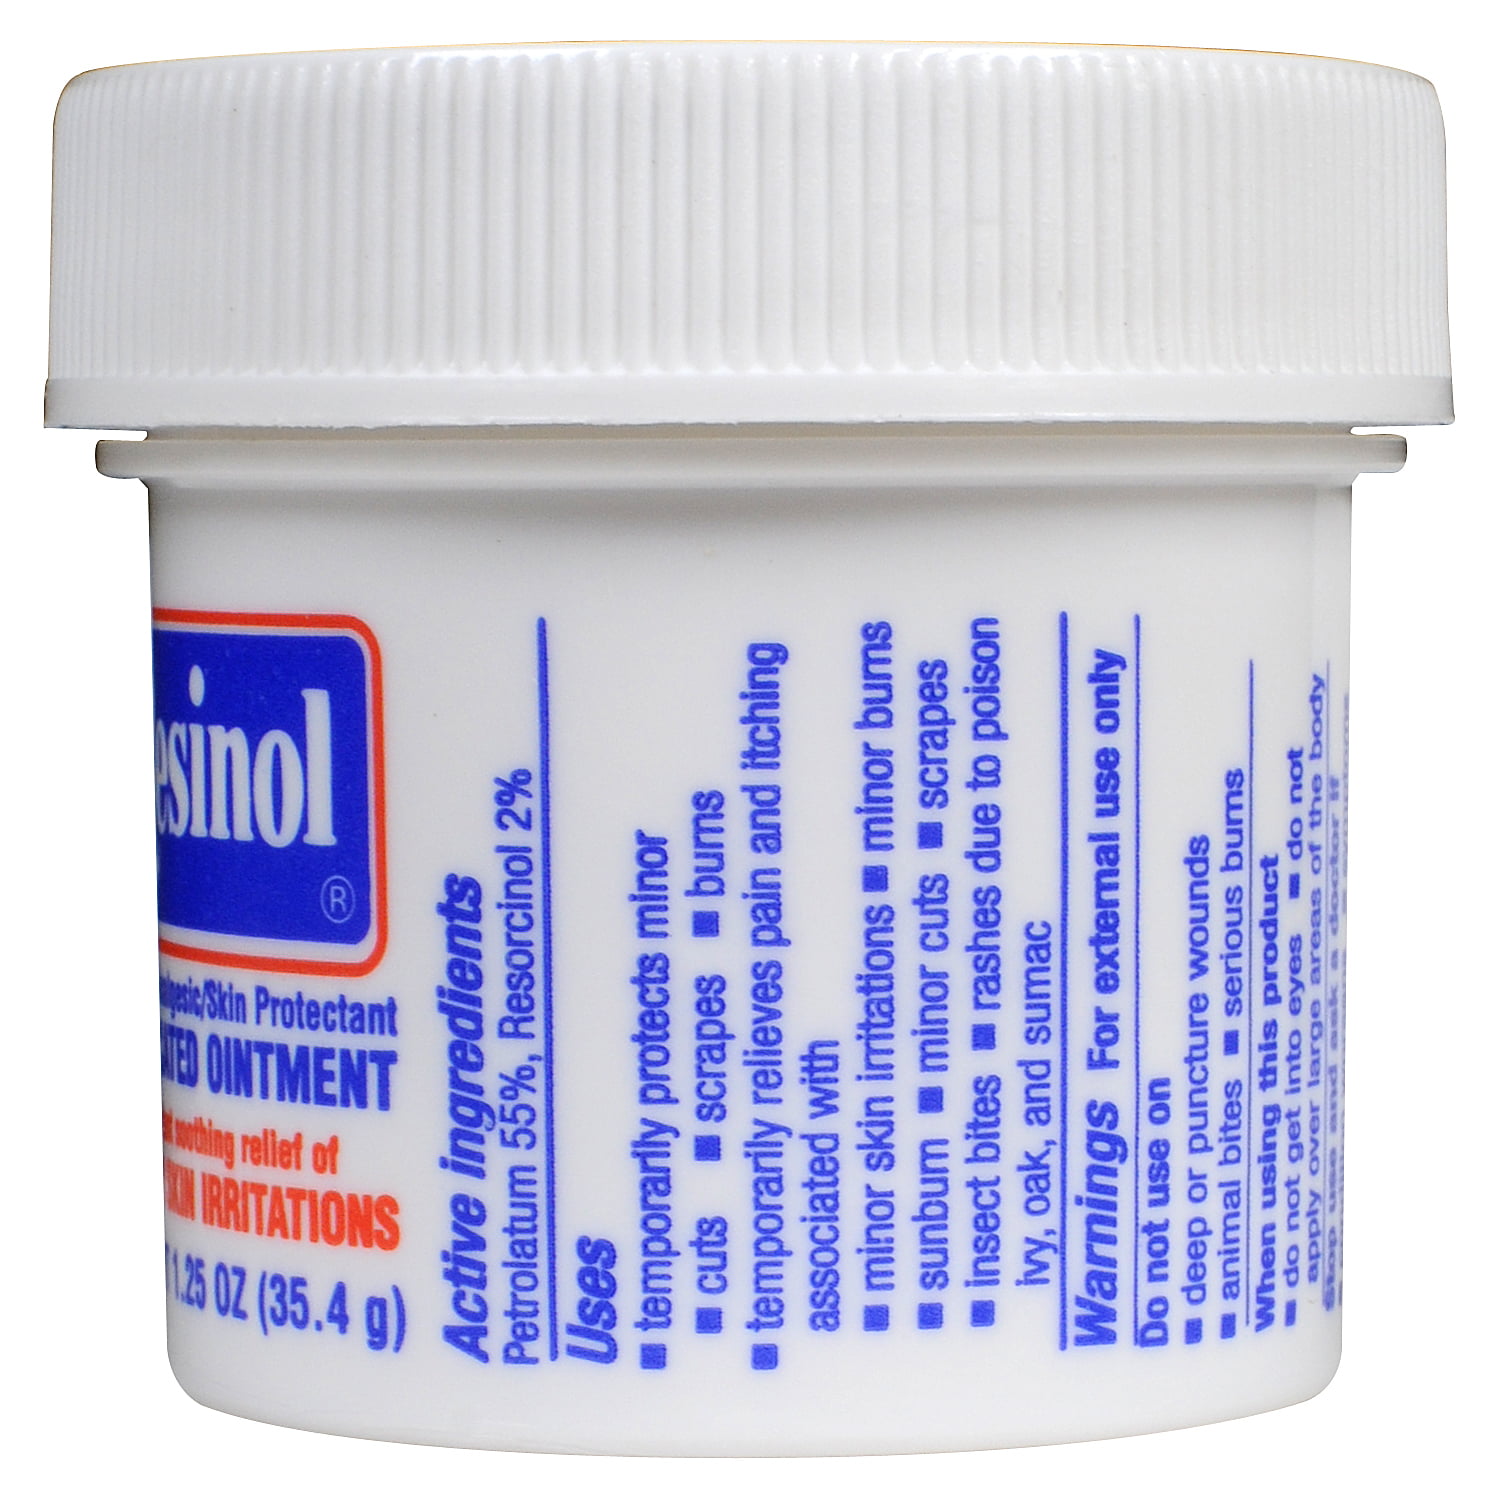 Resinol Medicated Ointment for Pain Relief and Protection of Skin  Irritations, 1.25 Oz Jar